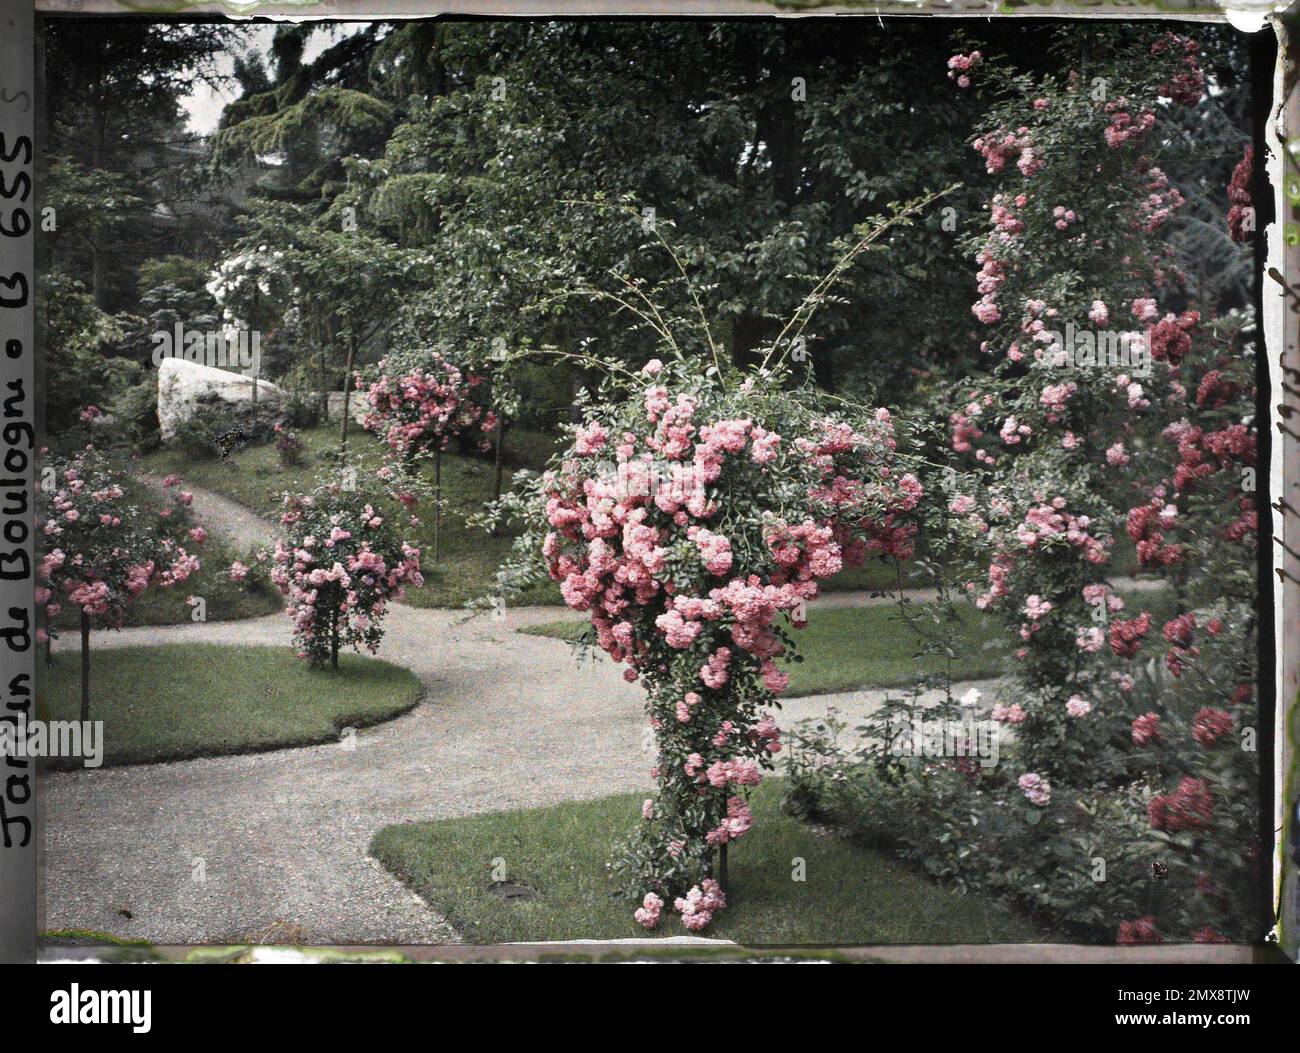 Property of Albert Kahn, Boulogne, France Southeast corner of the Verger-Roseraie  decorated with flower roses, located on the edge of the Japanese garden  Stock Photo - Alamy